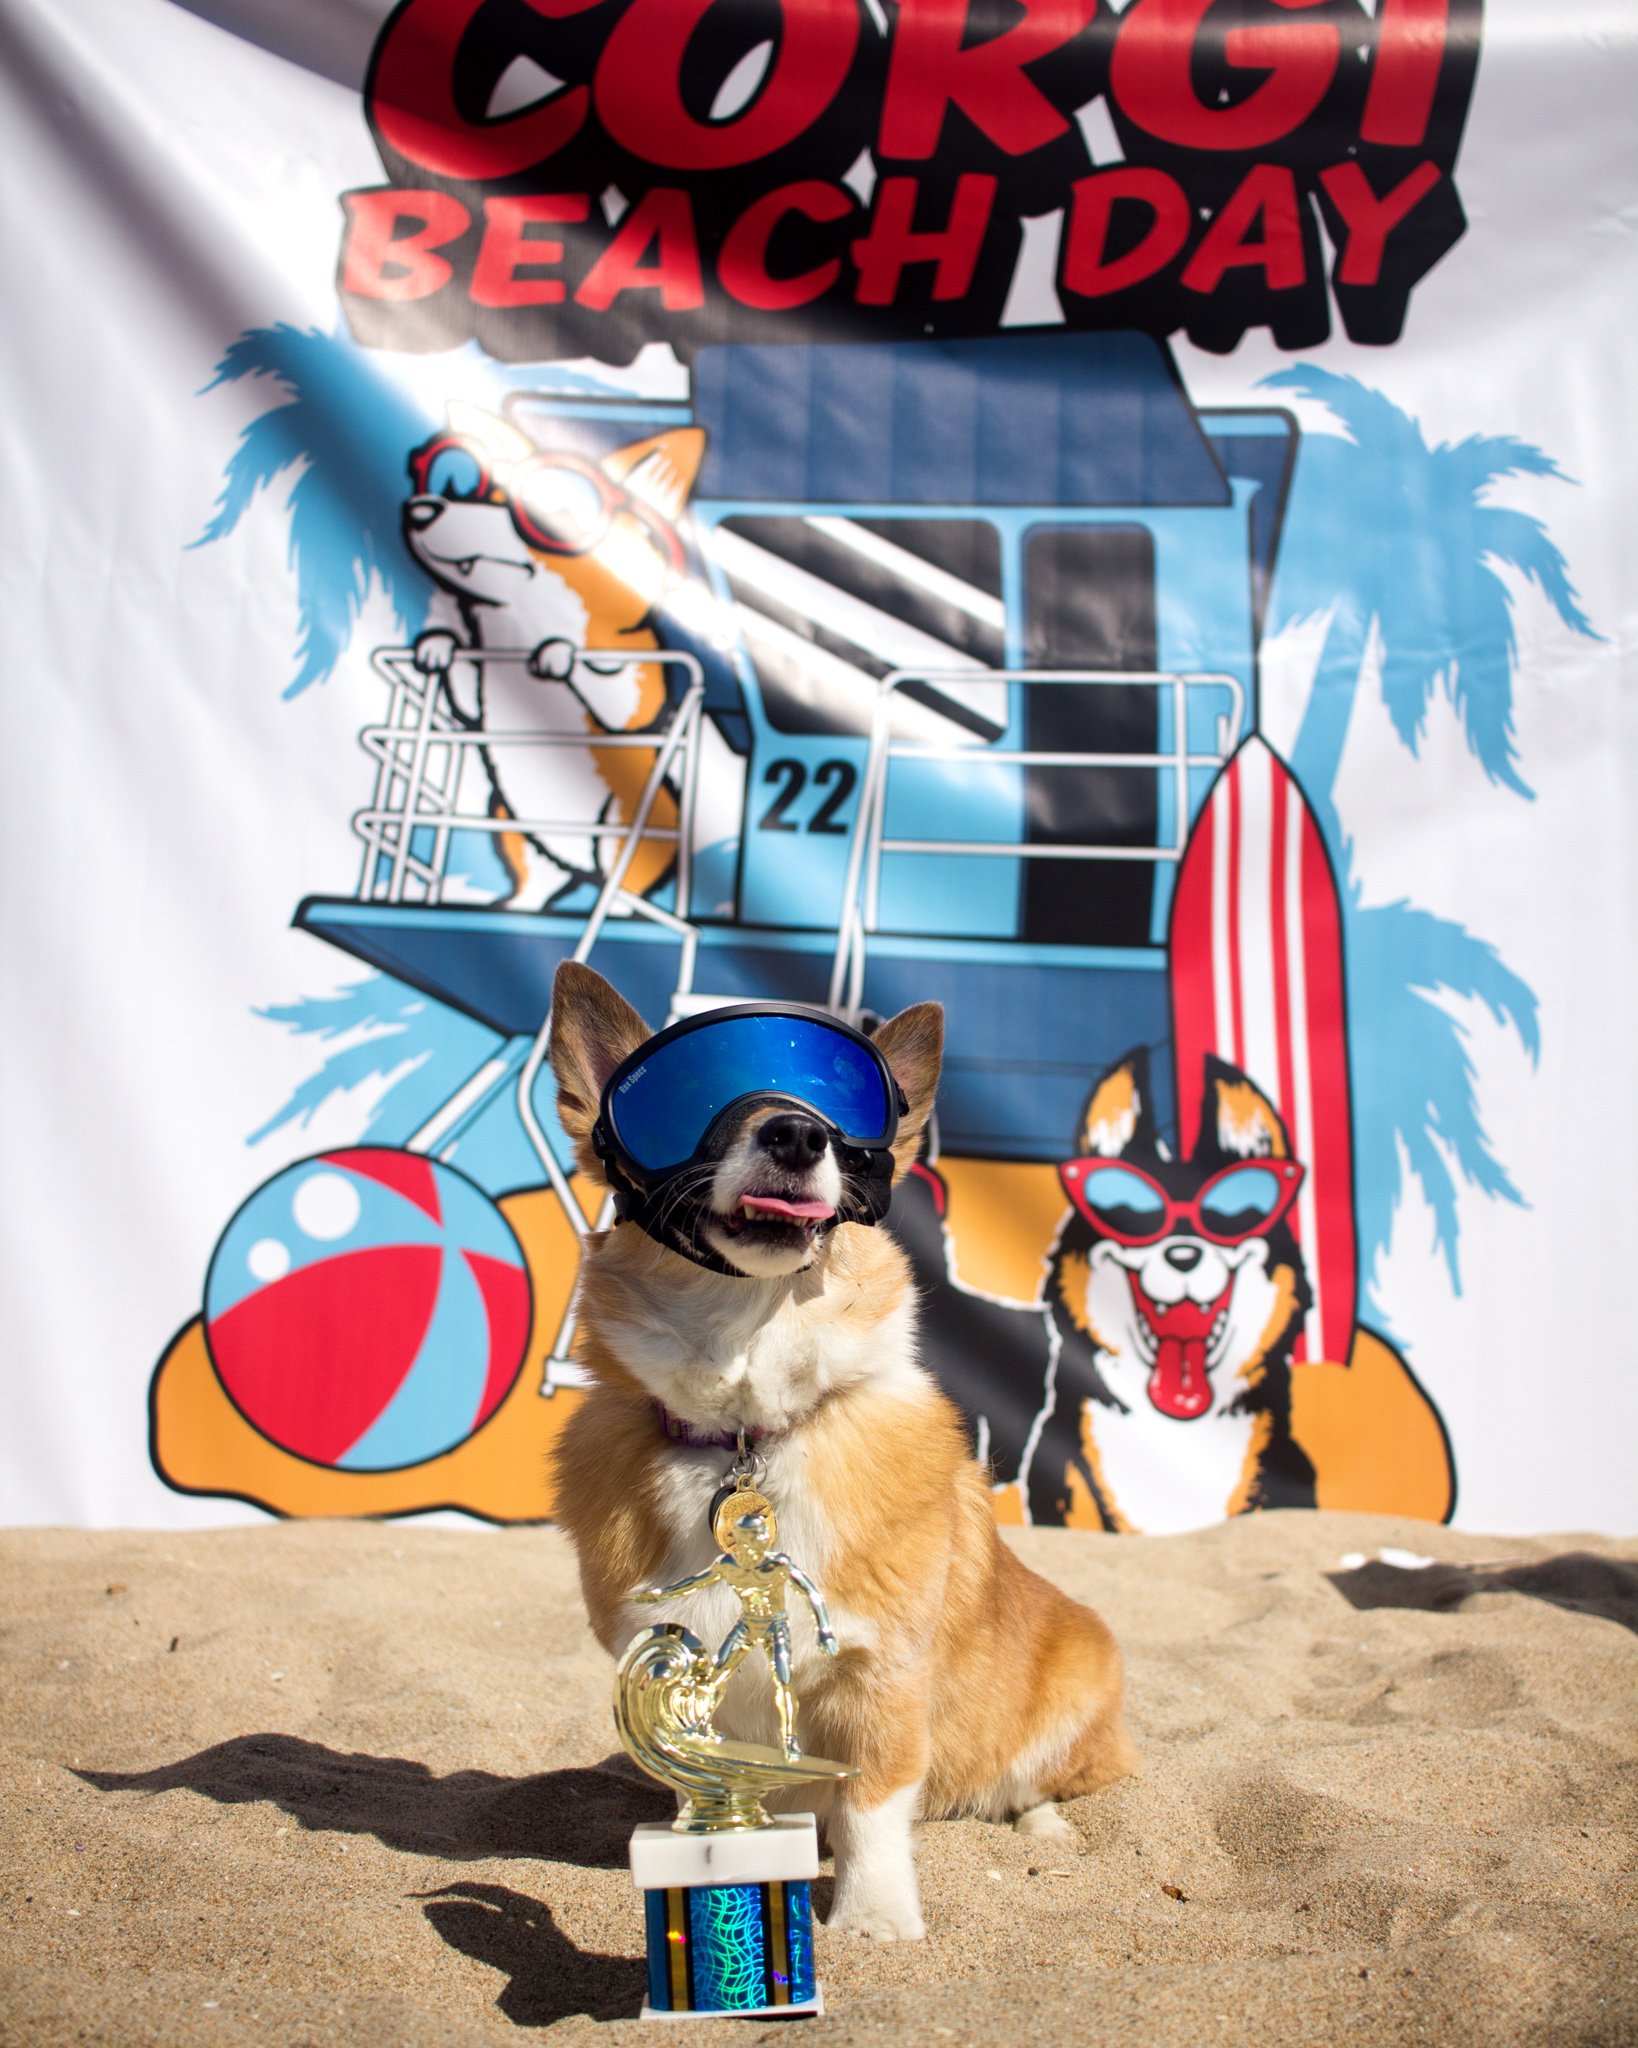 Orange County Pet and Dog Photography - by Steamer Lee - Corgi Beach Day - Southern Caliornia  63 (2).jpg